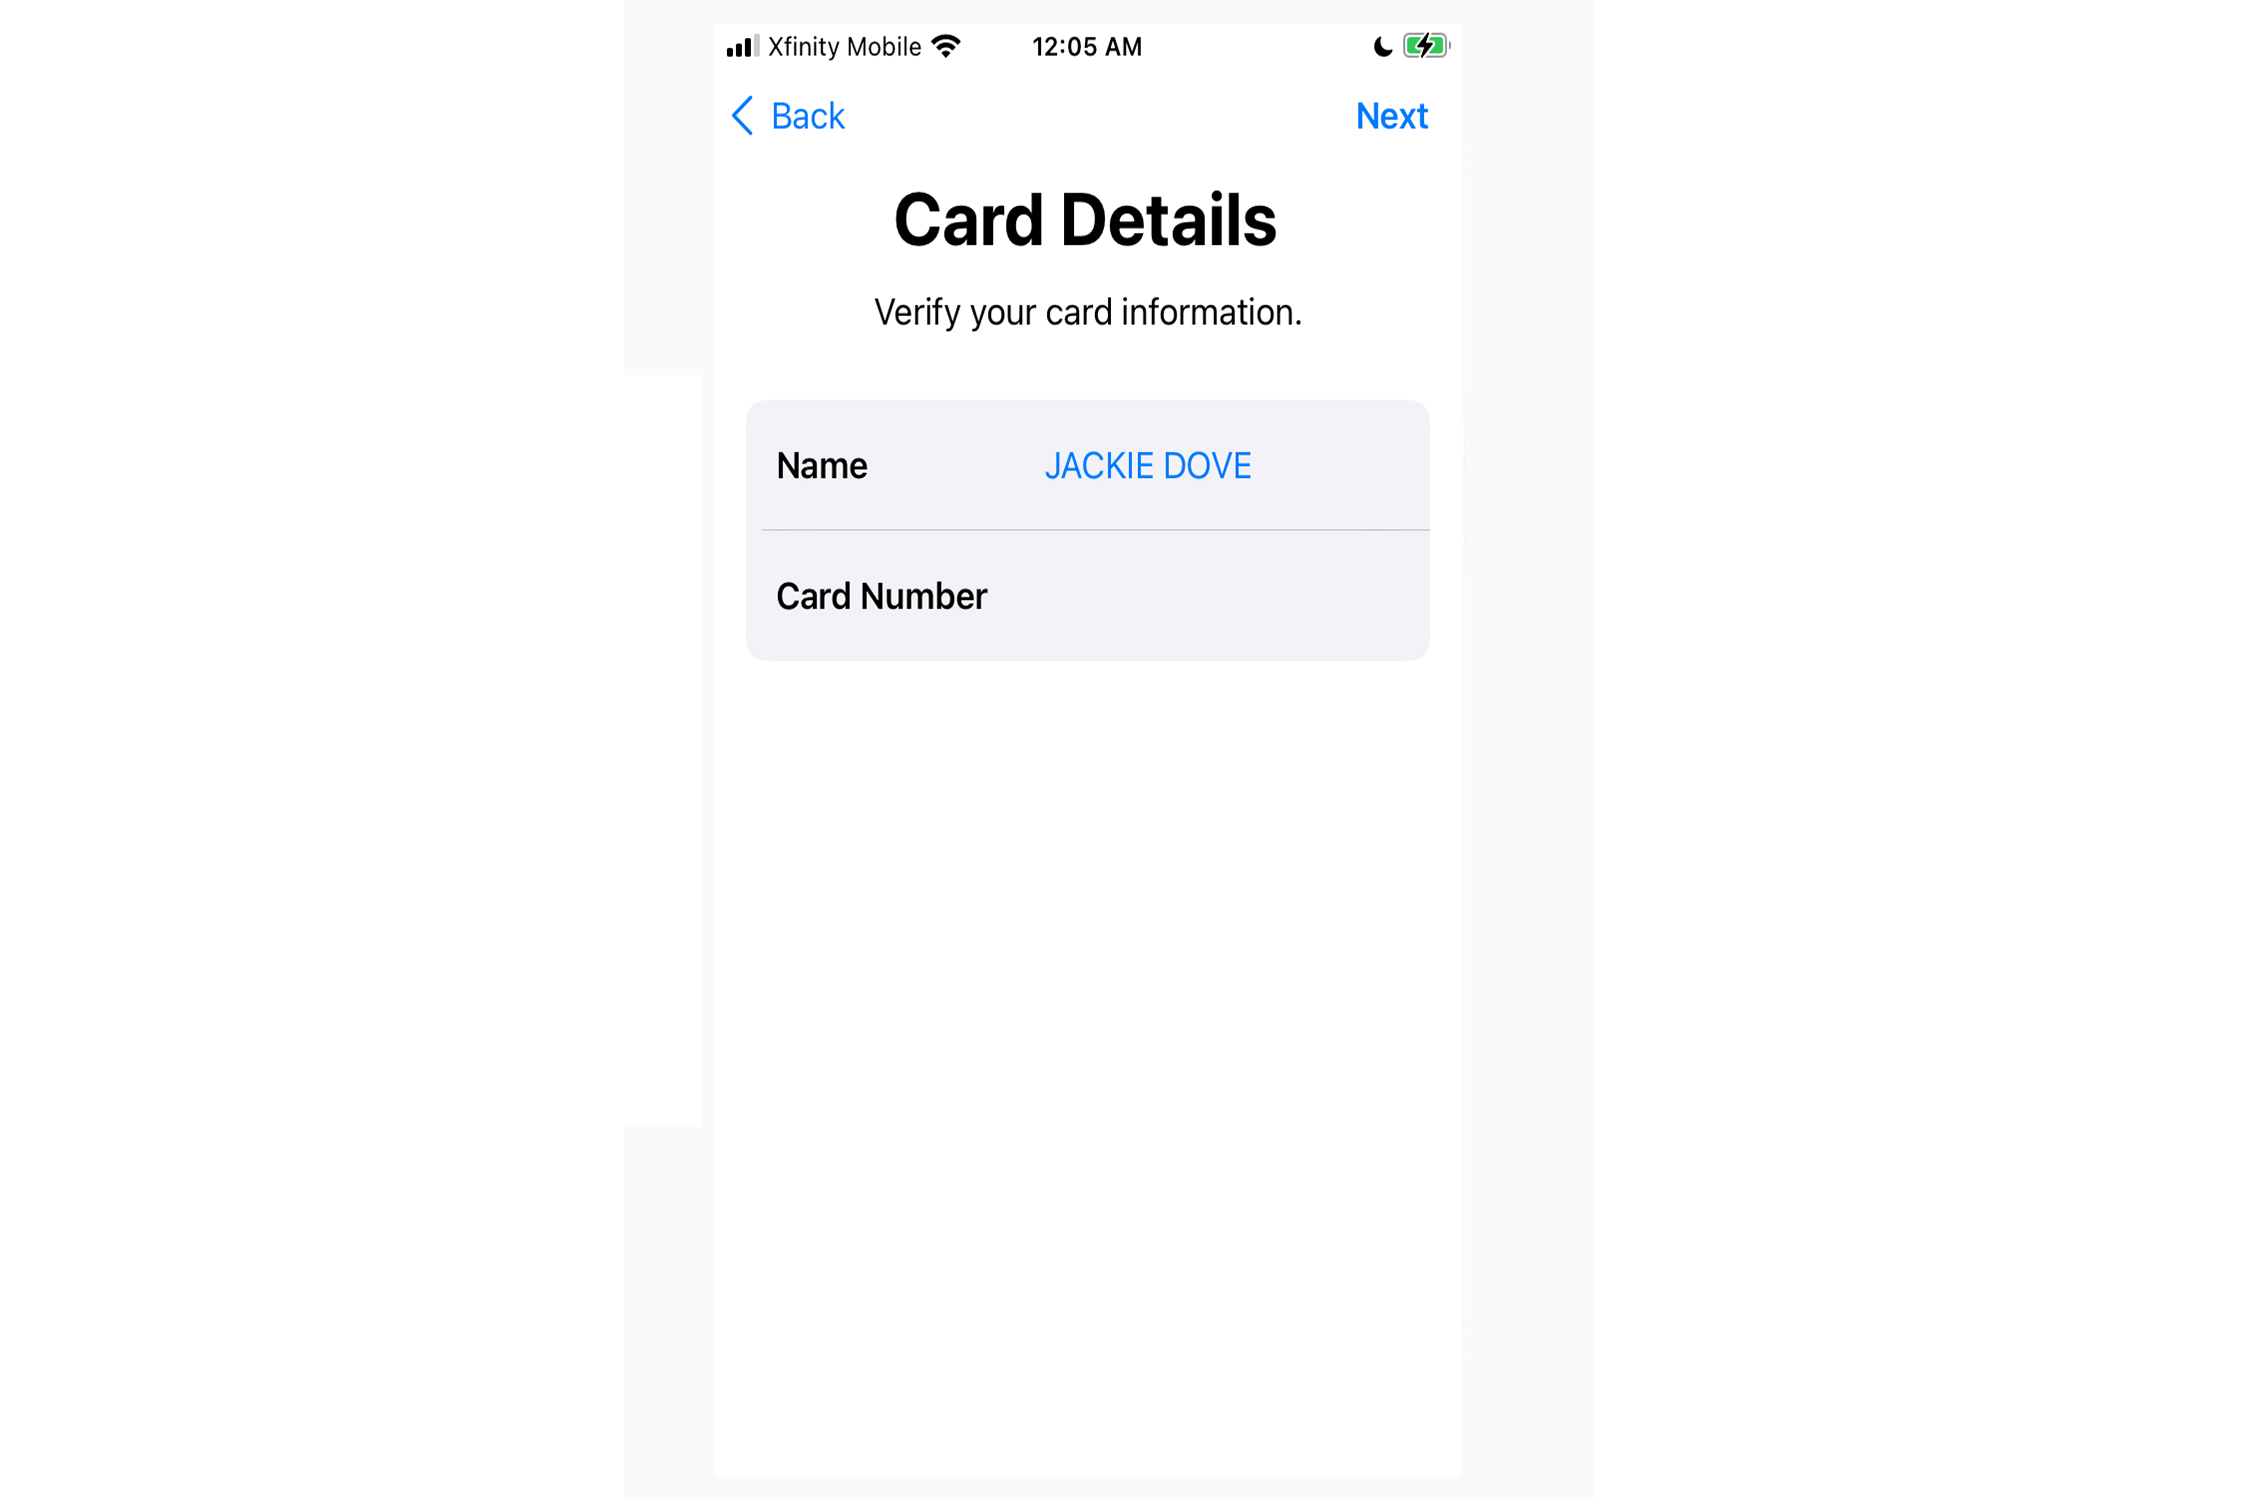 Adding information to Apple Wallet.